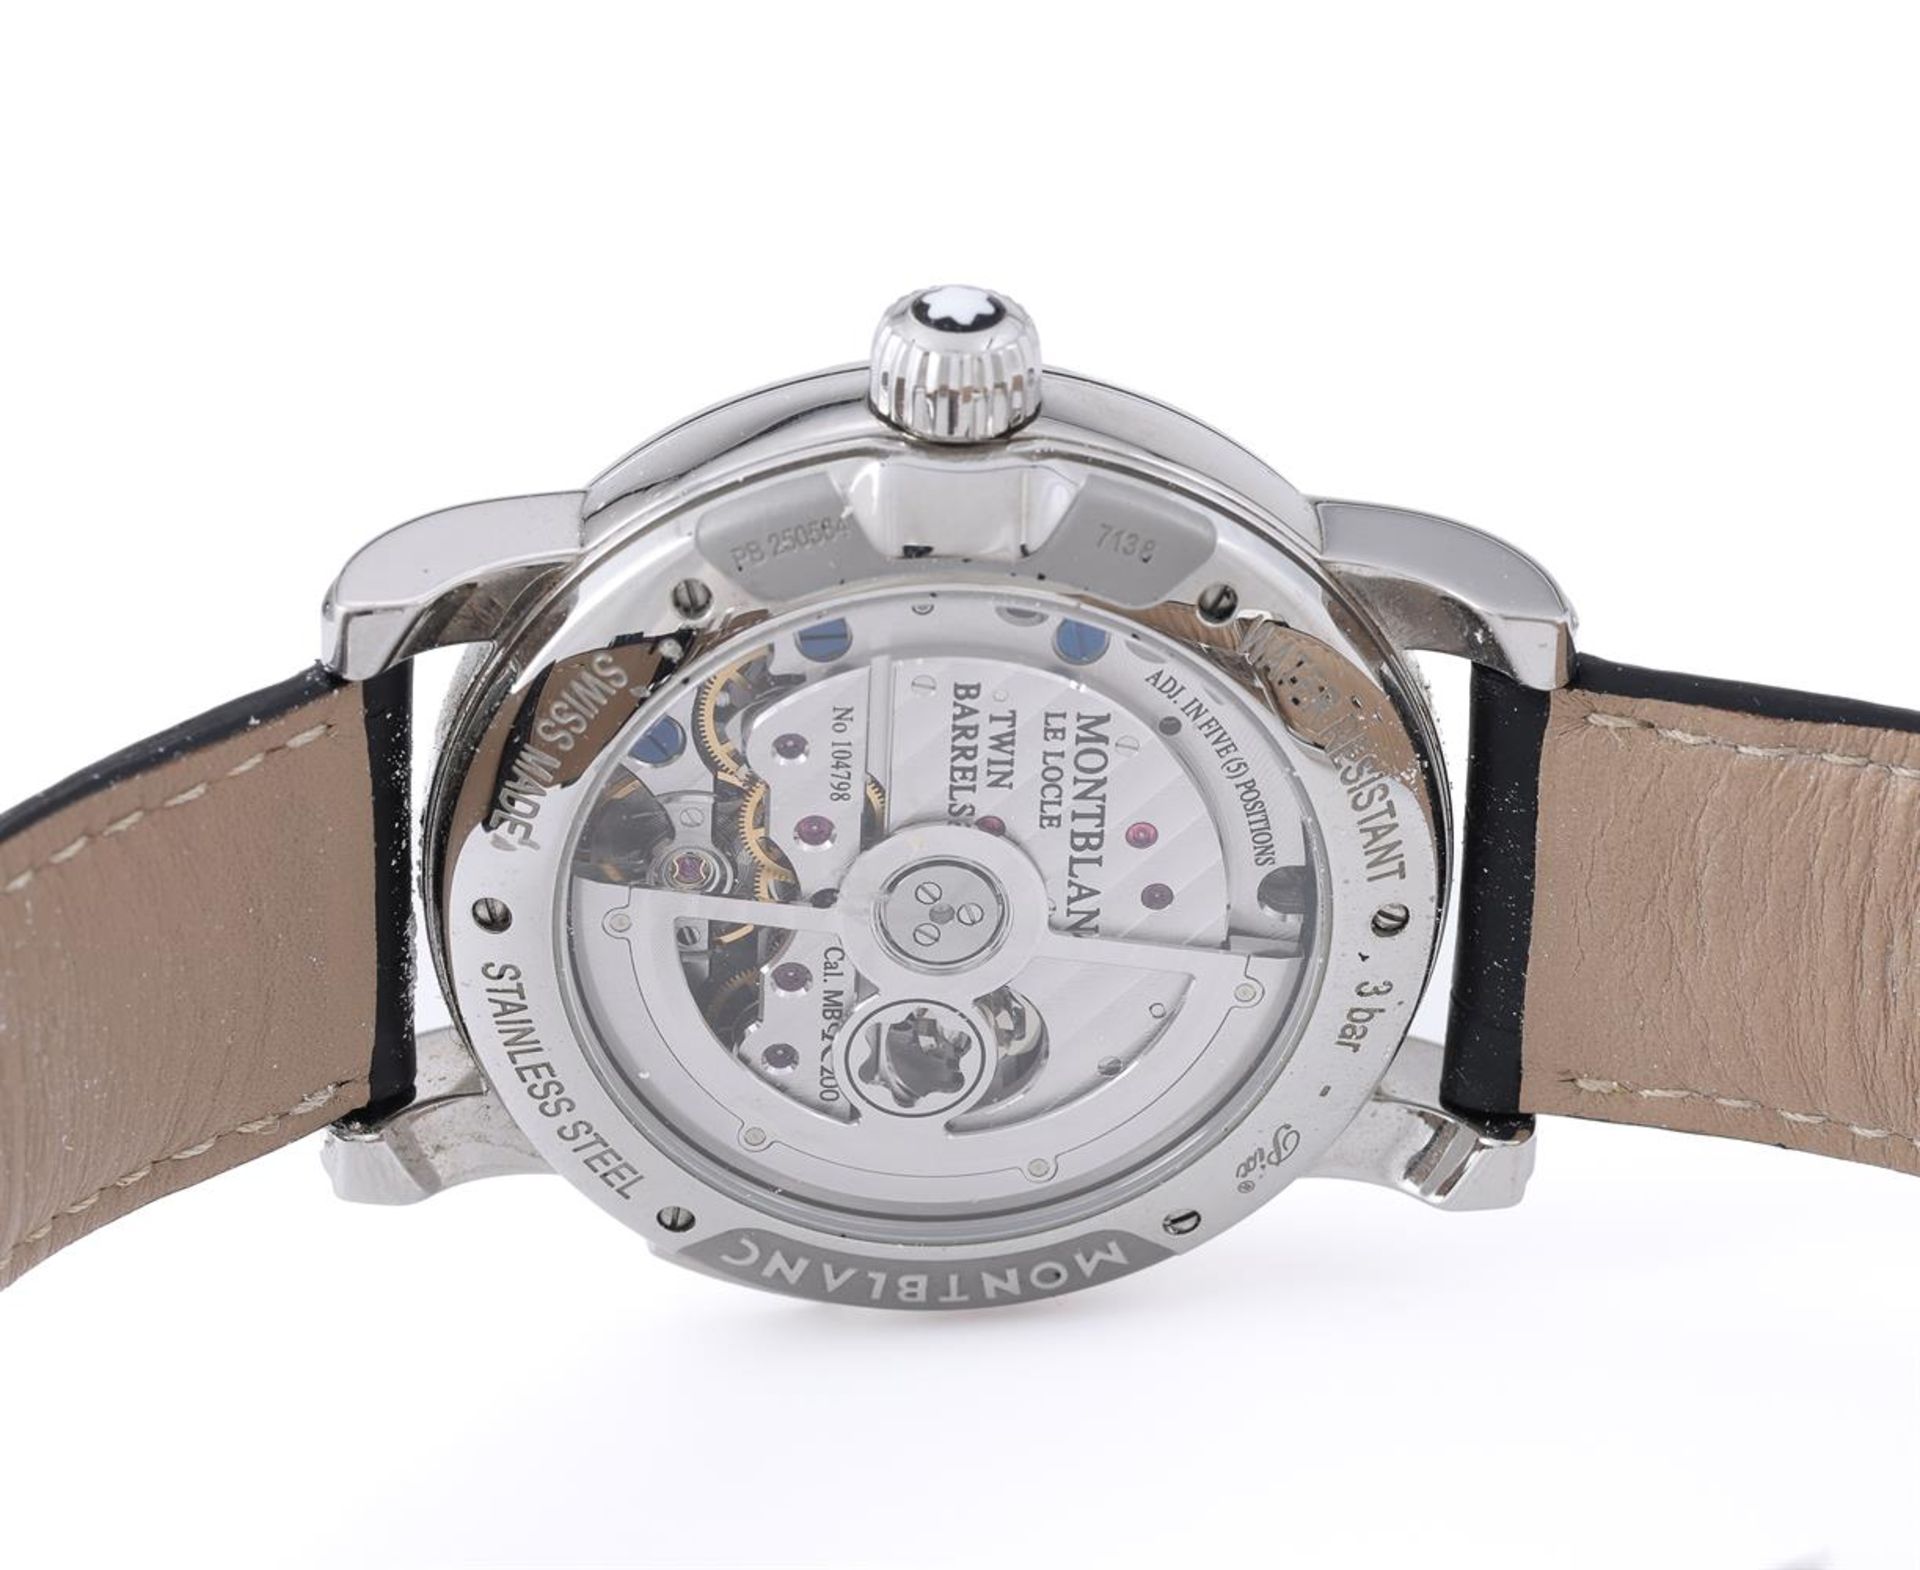 Y MONTBLANC, NICHOLAS RIEUSSEC, REF. M29447 7138, A STAINLESS STEEL CHRONOGRAPH WRISTWATCH - Image 2 of 2